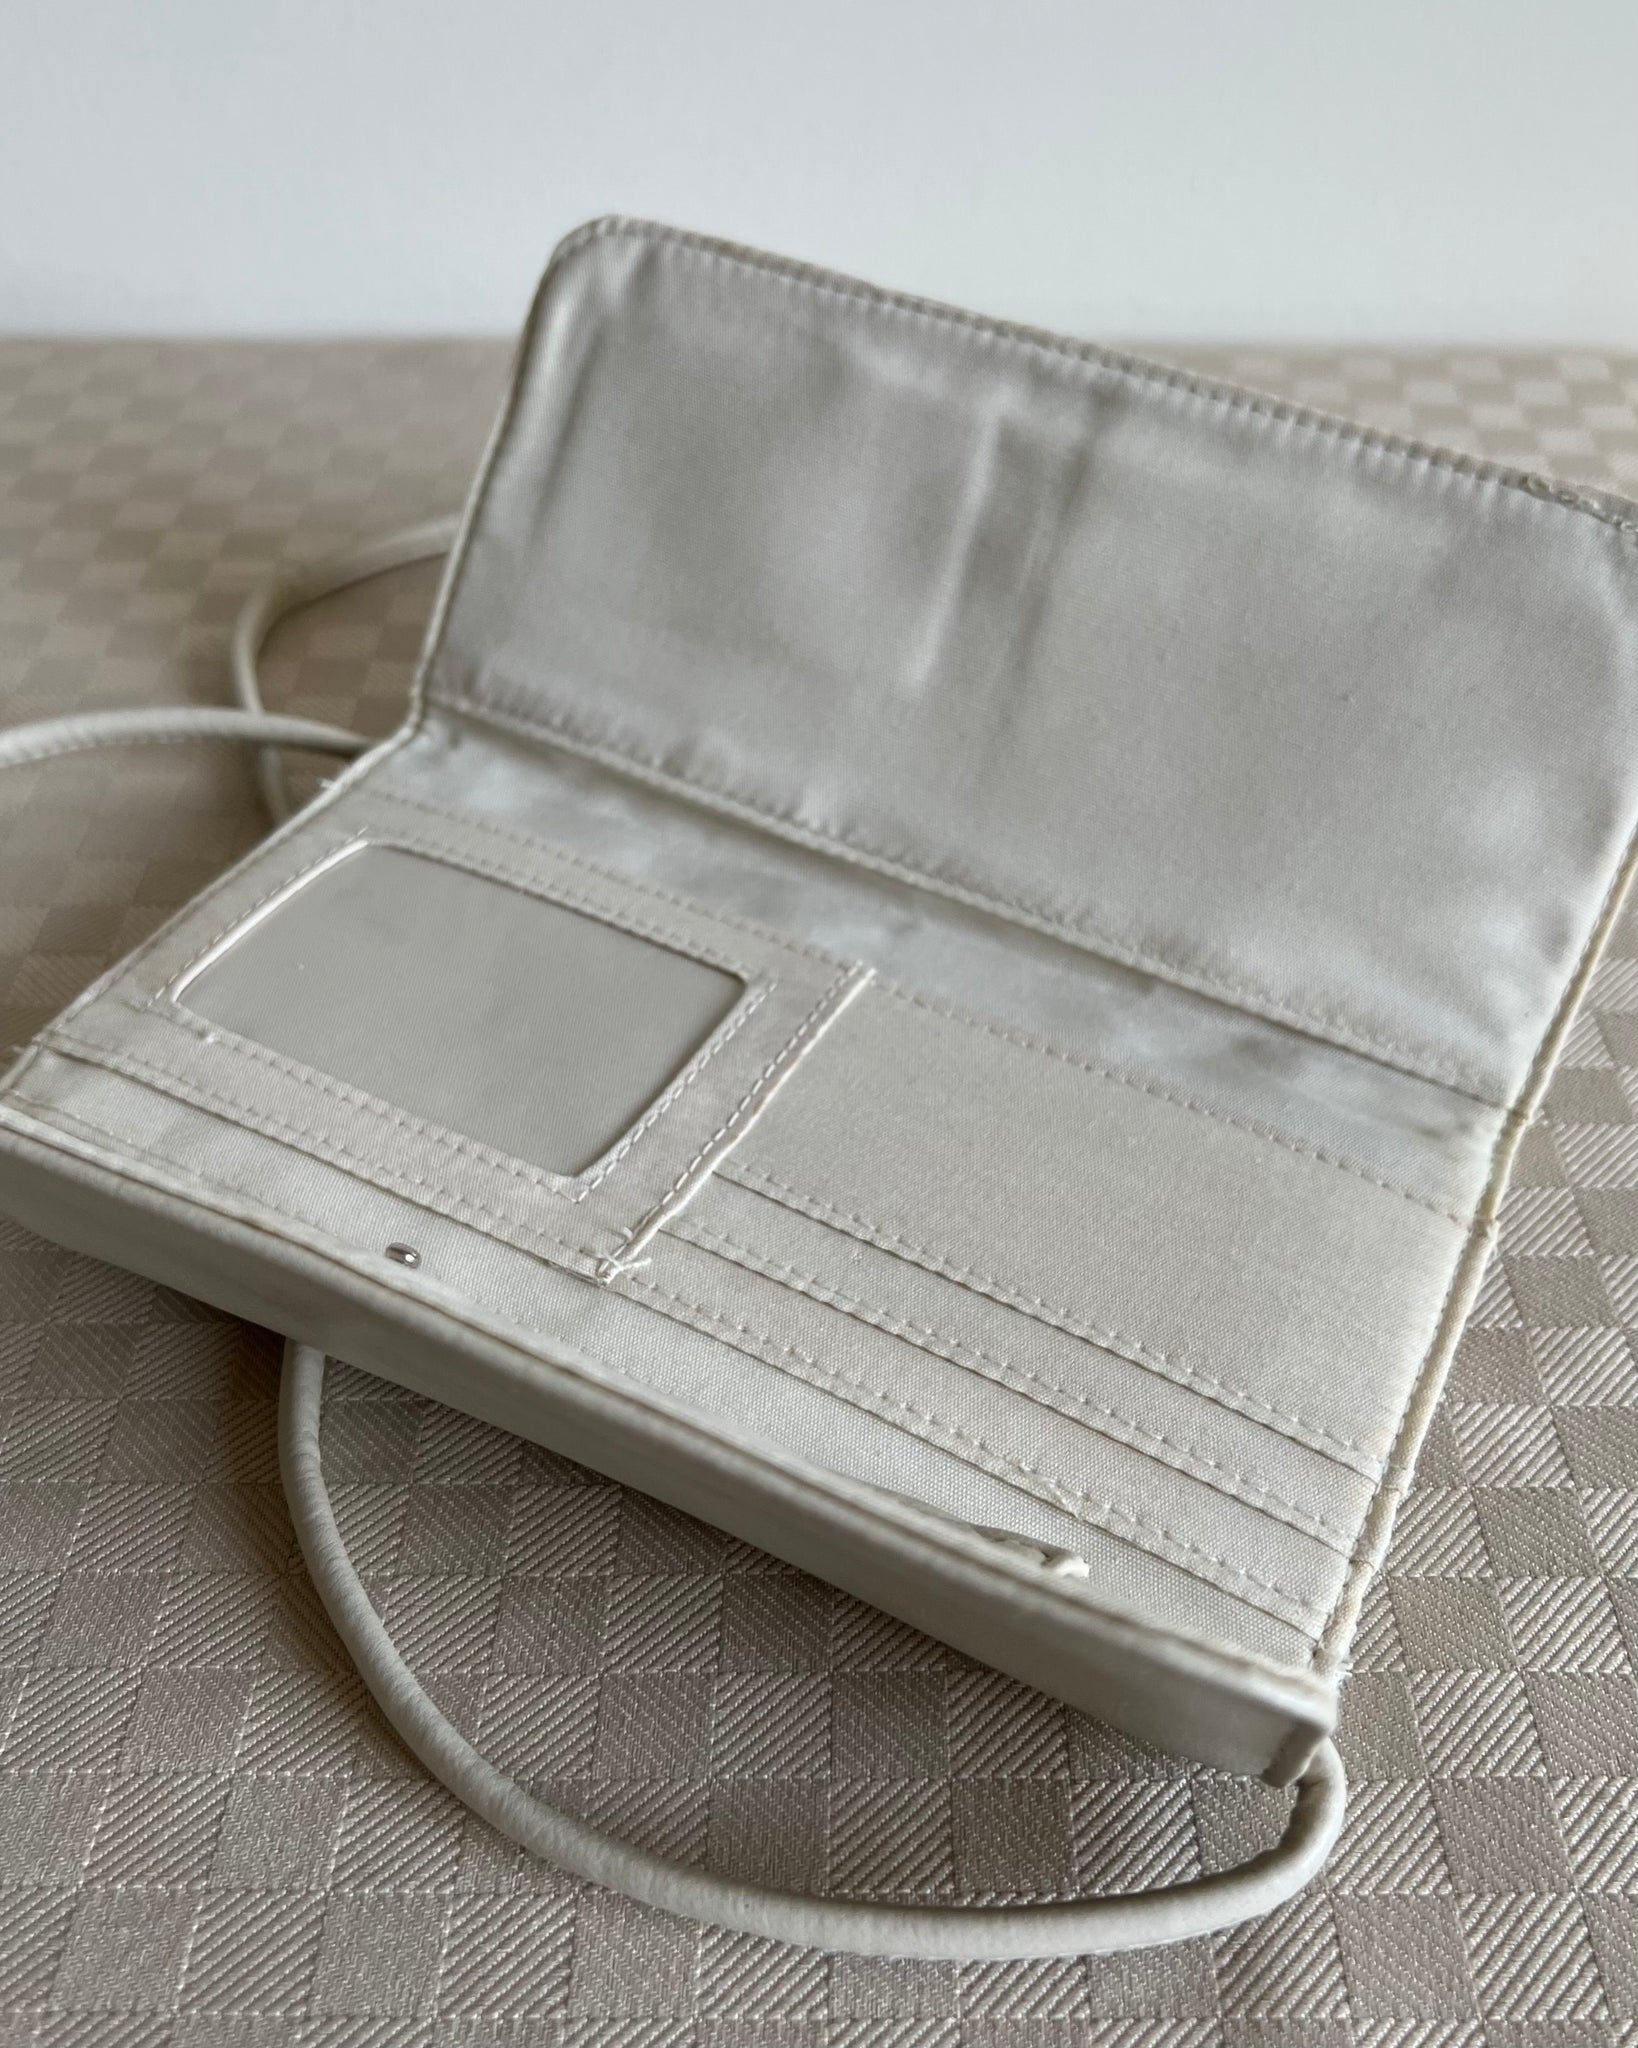 90s Cream Leather Wallet Purse